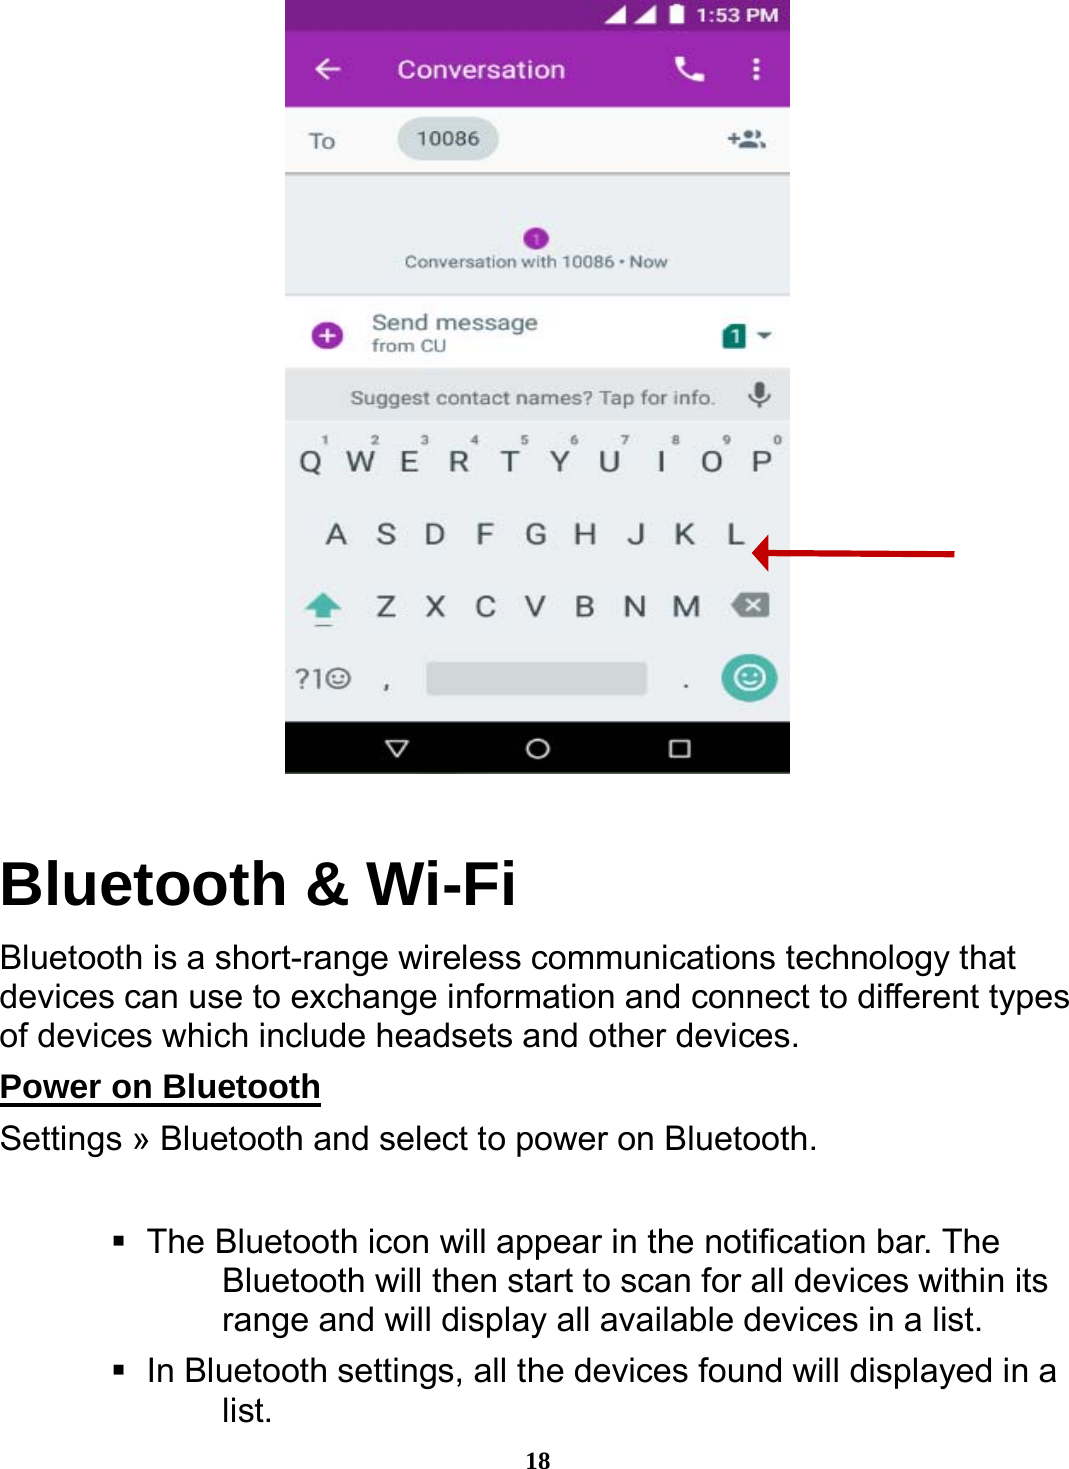  18  Bluetooth &amp; Wi-Fi Bluetooth is a short-range wireless communications technology that devices can use to exchange information and connect to different types of devices which include headsets and other devices. Power on Bluetooth                                                 Settings » Bluetooth and select to power on Bluetooth.     The Bluetooth icon will appear in the notification bar. The Bluetooth will then start to scan for all devices within its range and will display all available devices in a list.    In Bluetooth settings, all the devices found will displayed in a list. 